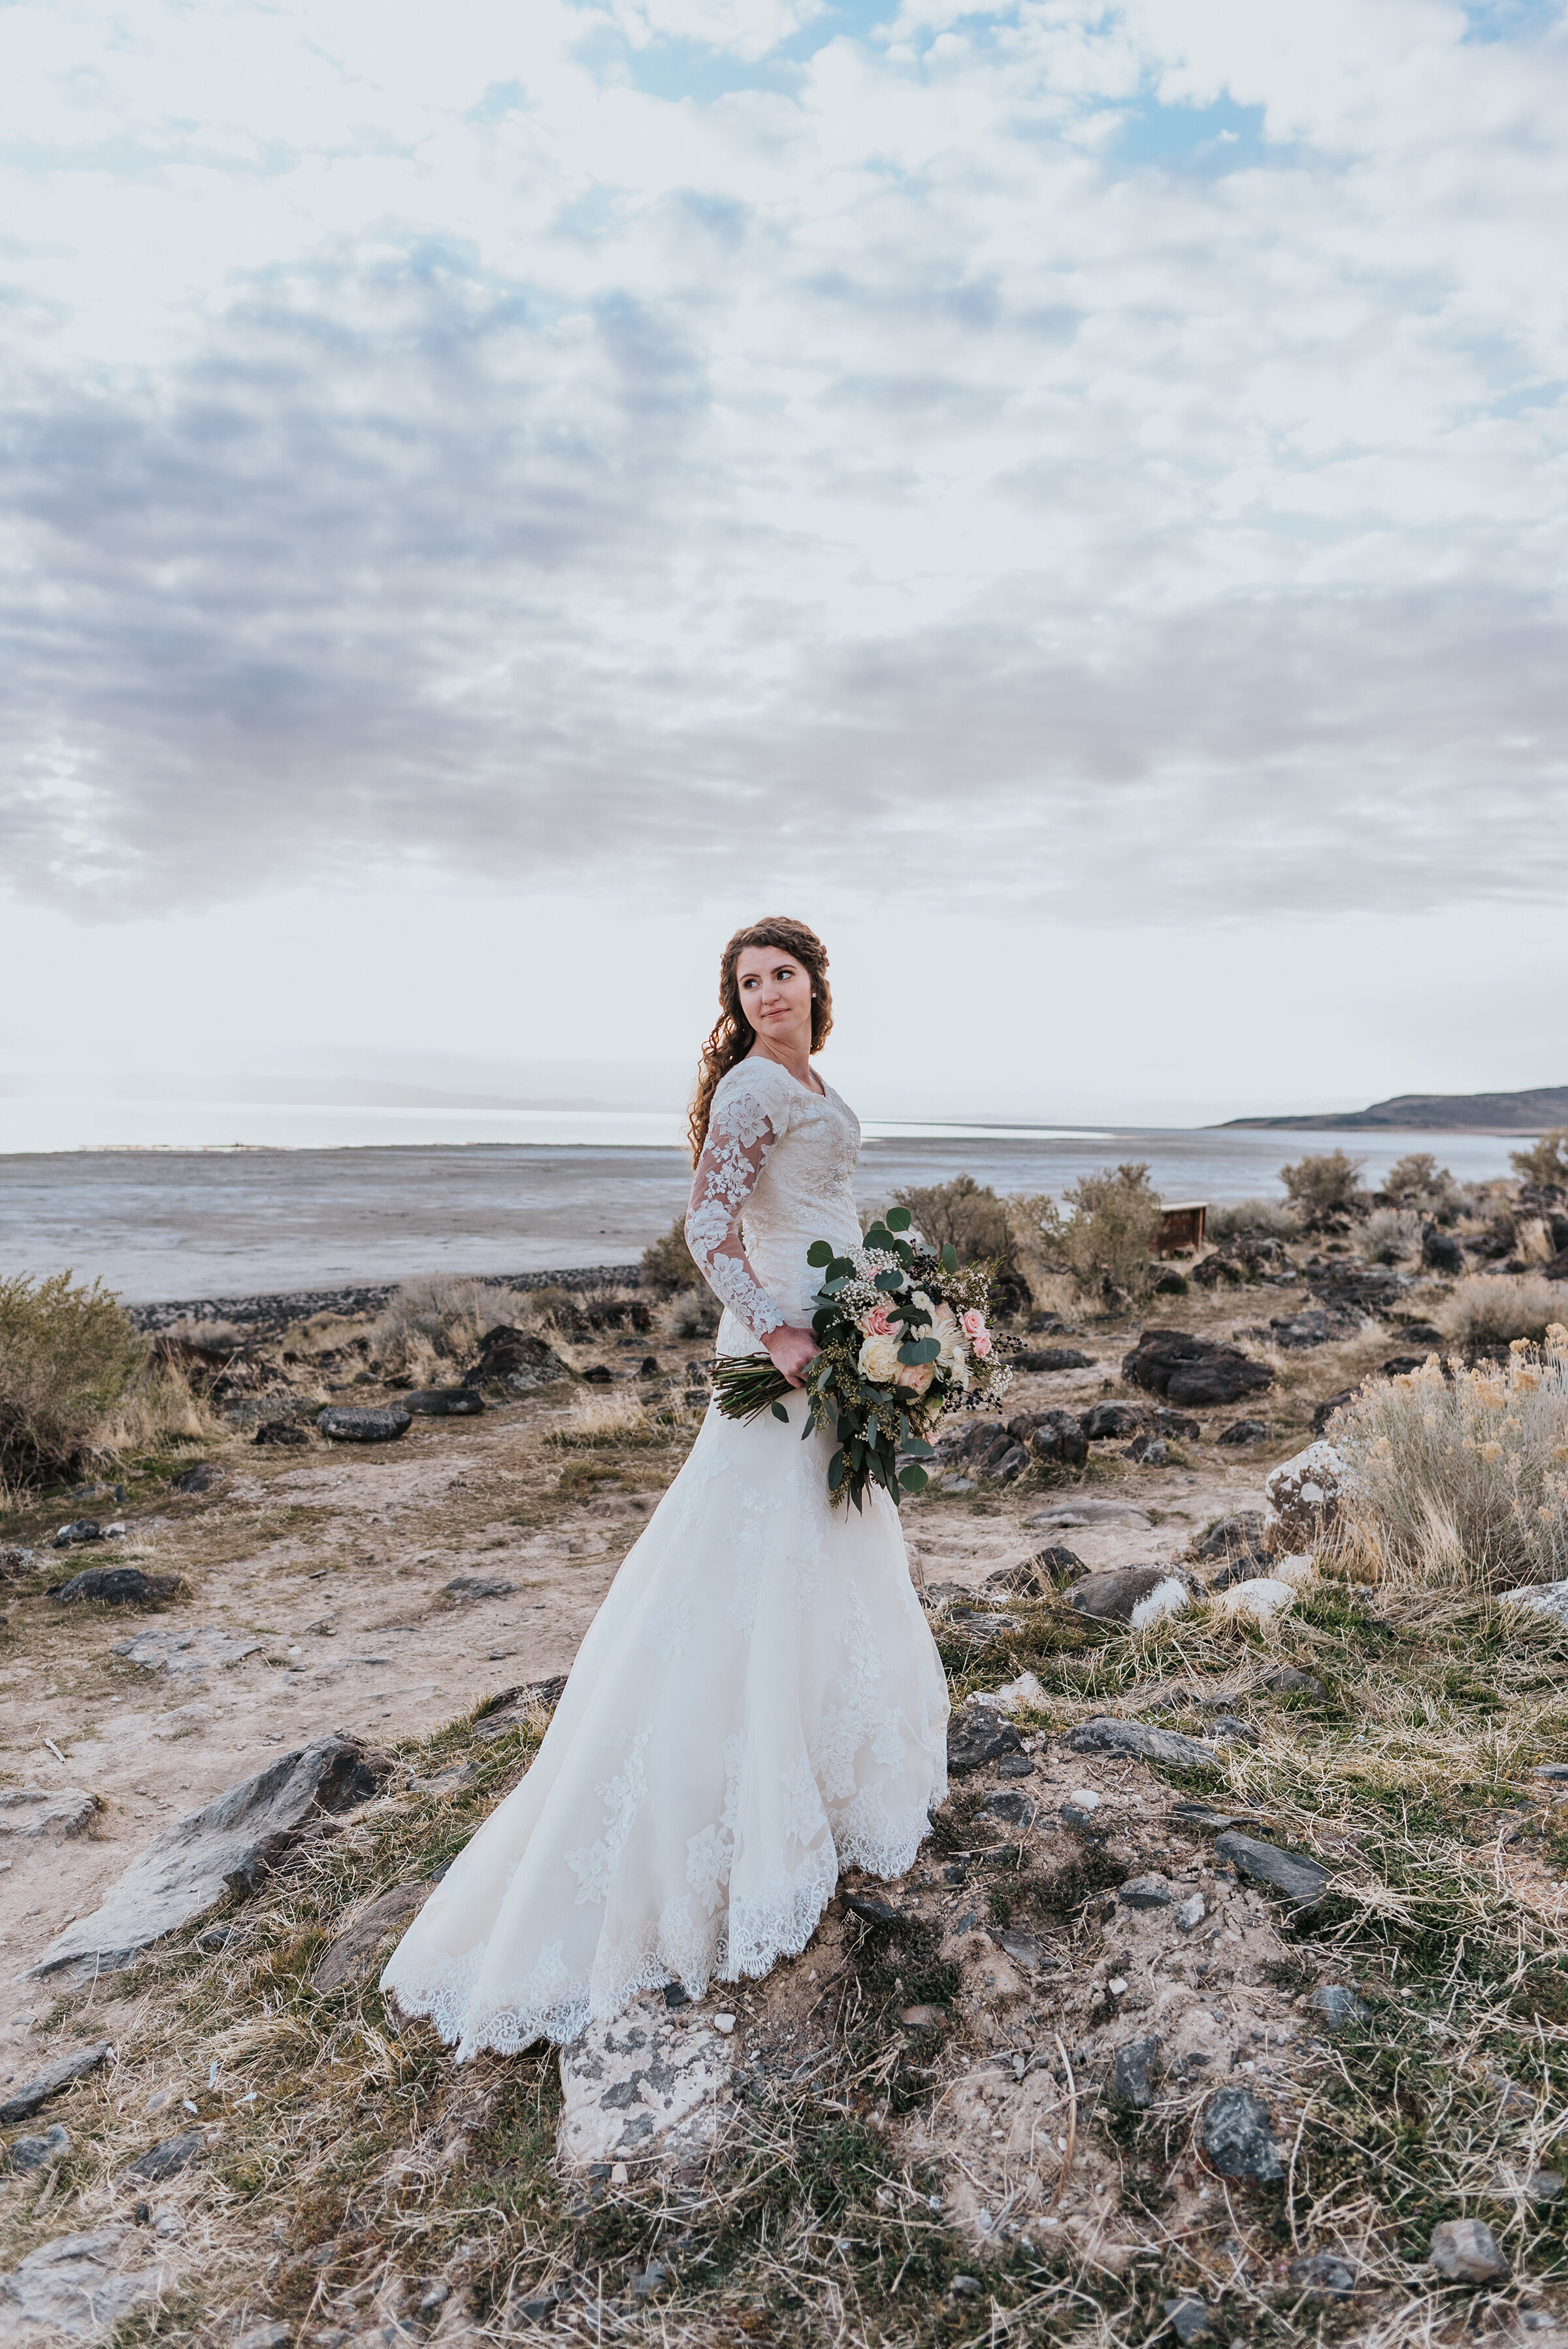  Absolutely stunning bride at the Spiral Jetty in a lace long sleeve wedding gown with the sand and water in the background and the dimension of the rocks at her feet. Wedding formal photoshoot in Spiral Jetty Northern Utah Great Salt Lake photography wedding formals natural photo aesthetic bride and groom #spiraljetty #utahphotography #weddingformals #gettingmarried #weddingattire #utahwedding #greatoutdoorswedding #weddingformalsphotoshoot #naturalbeauty 